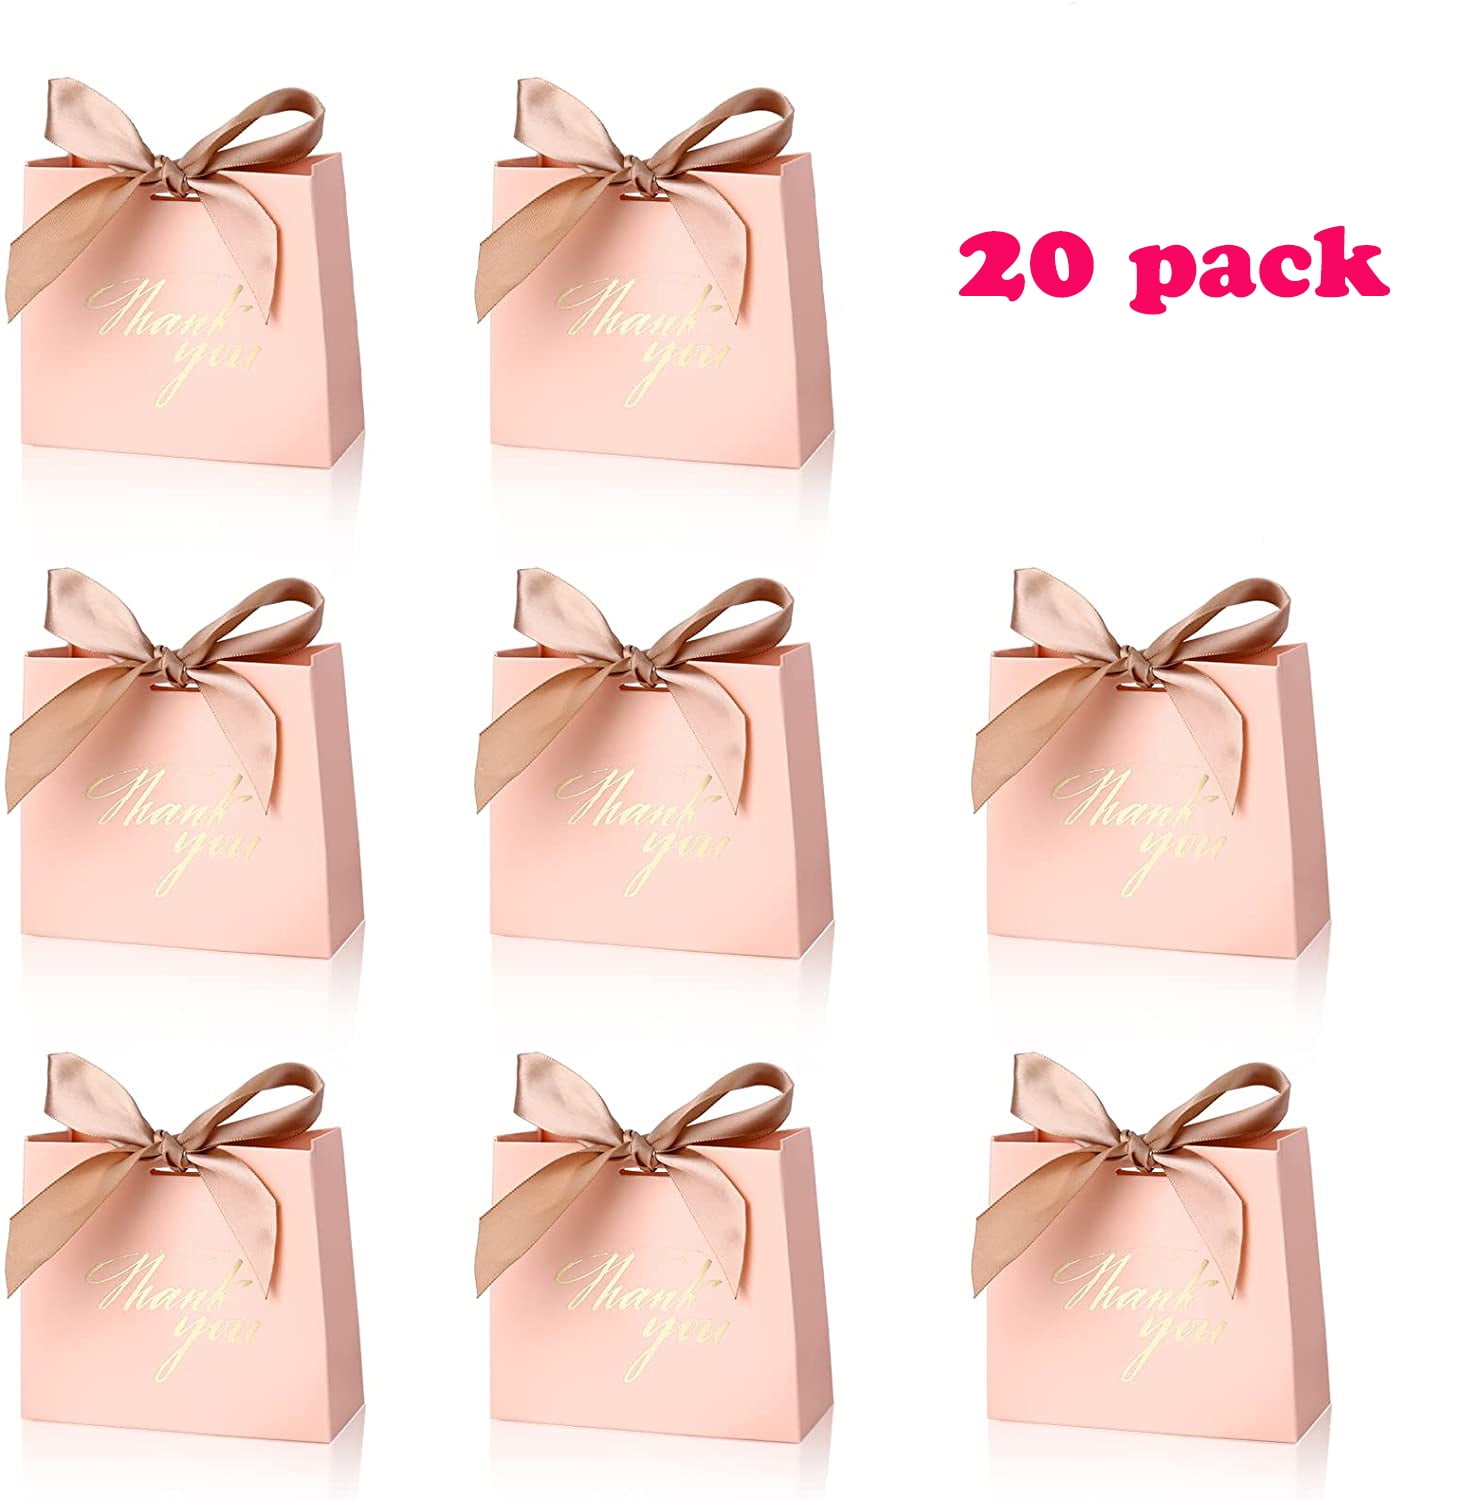 Details about   50pcs Thank You Plastic Candy Gift Bags Shopping Bags Wedding Wrapping BagsLDUK 